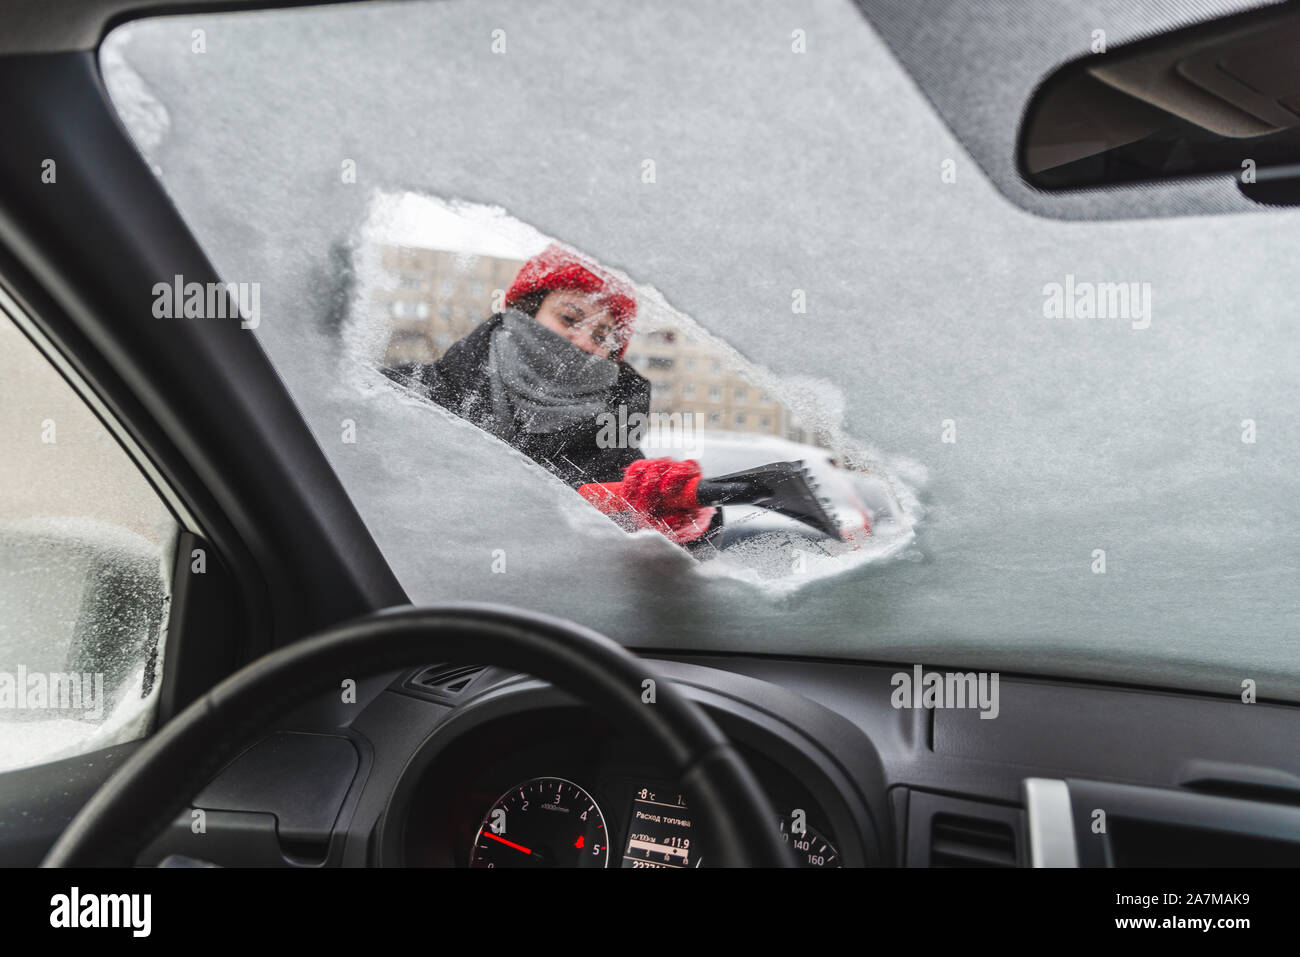 Woman Cleaning Car Interior Stockfotos Woman Cleaning Car